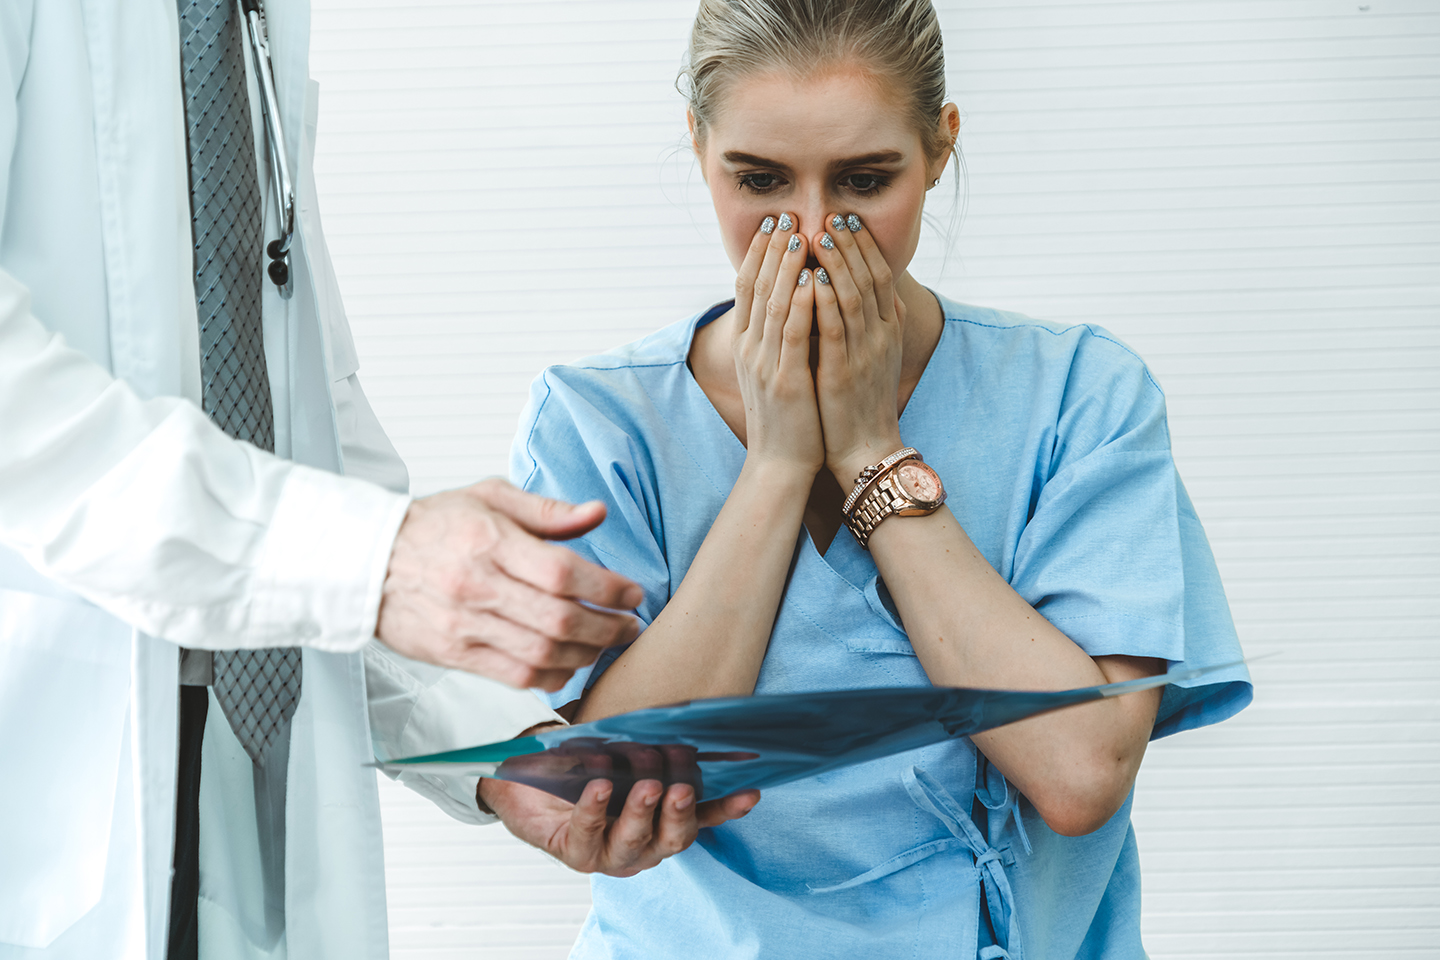 Woman in hospital gown with hands covering mouth shocked at what the doctor is showing her